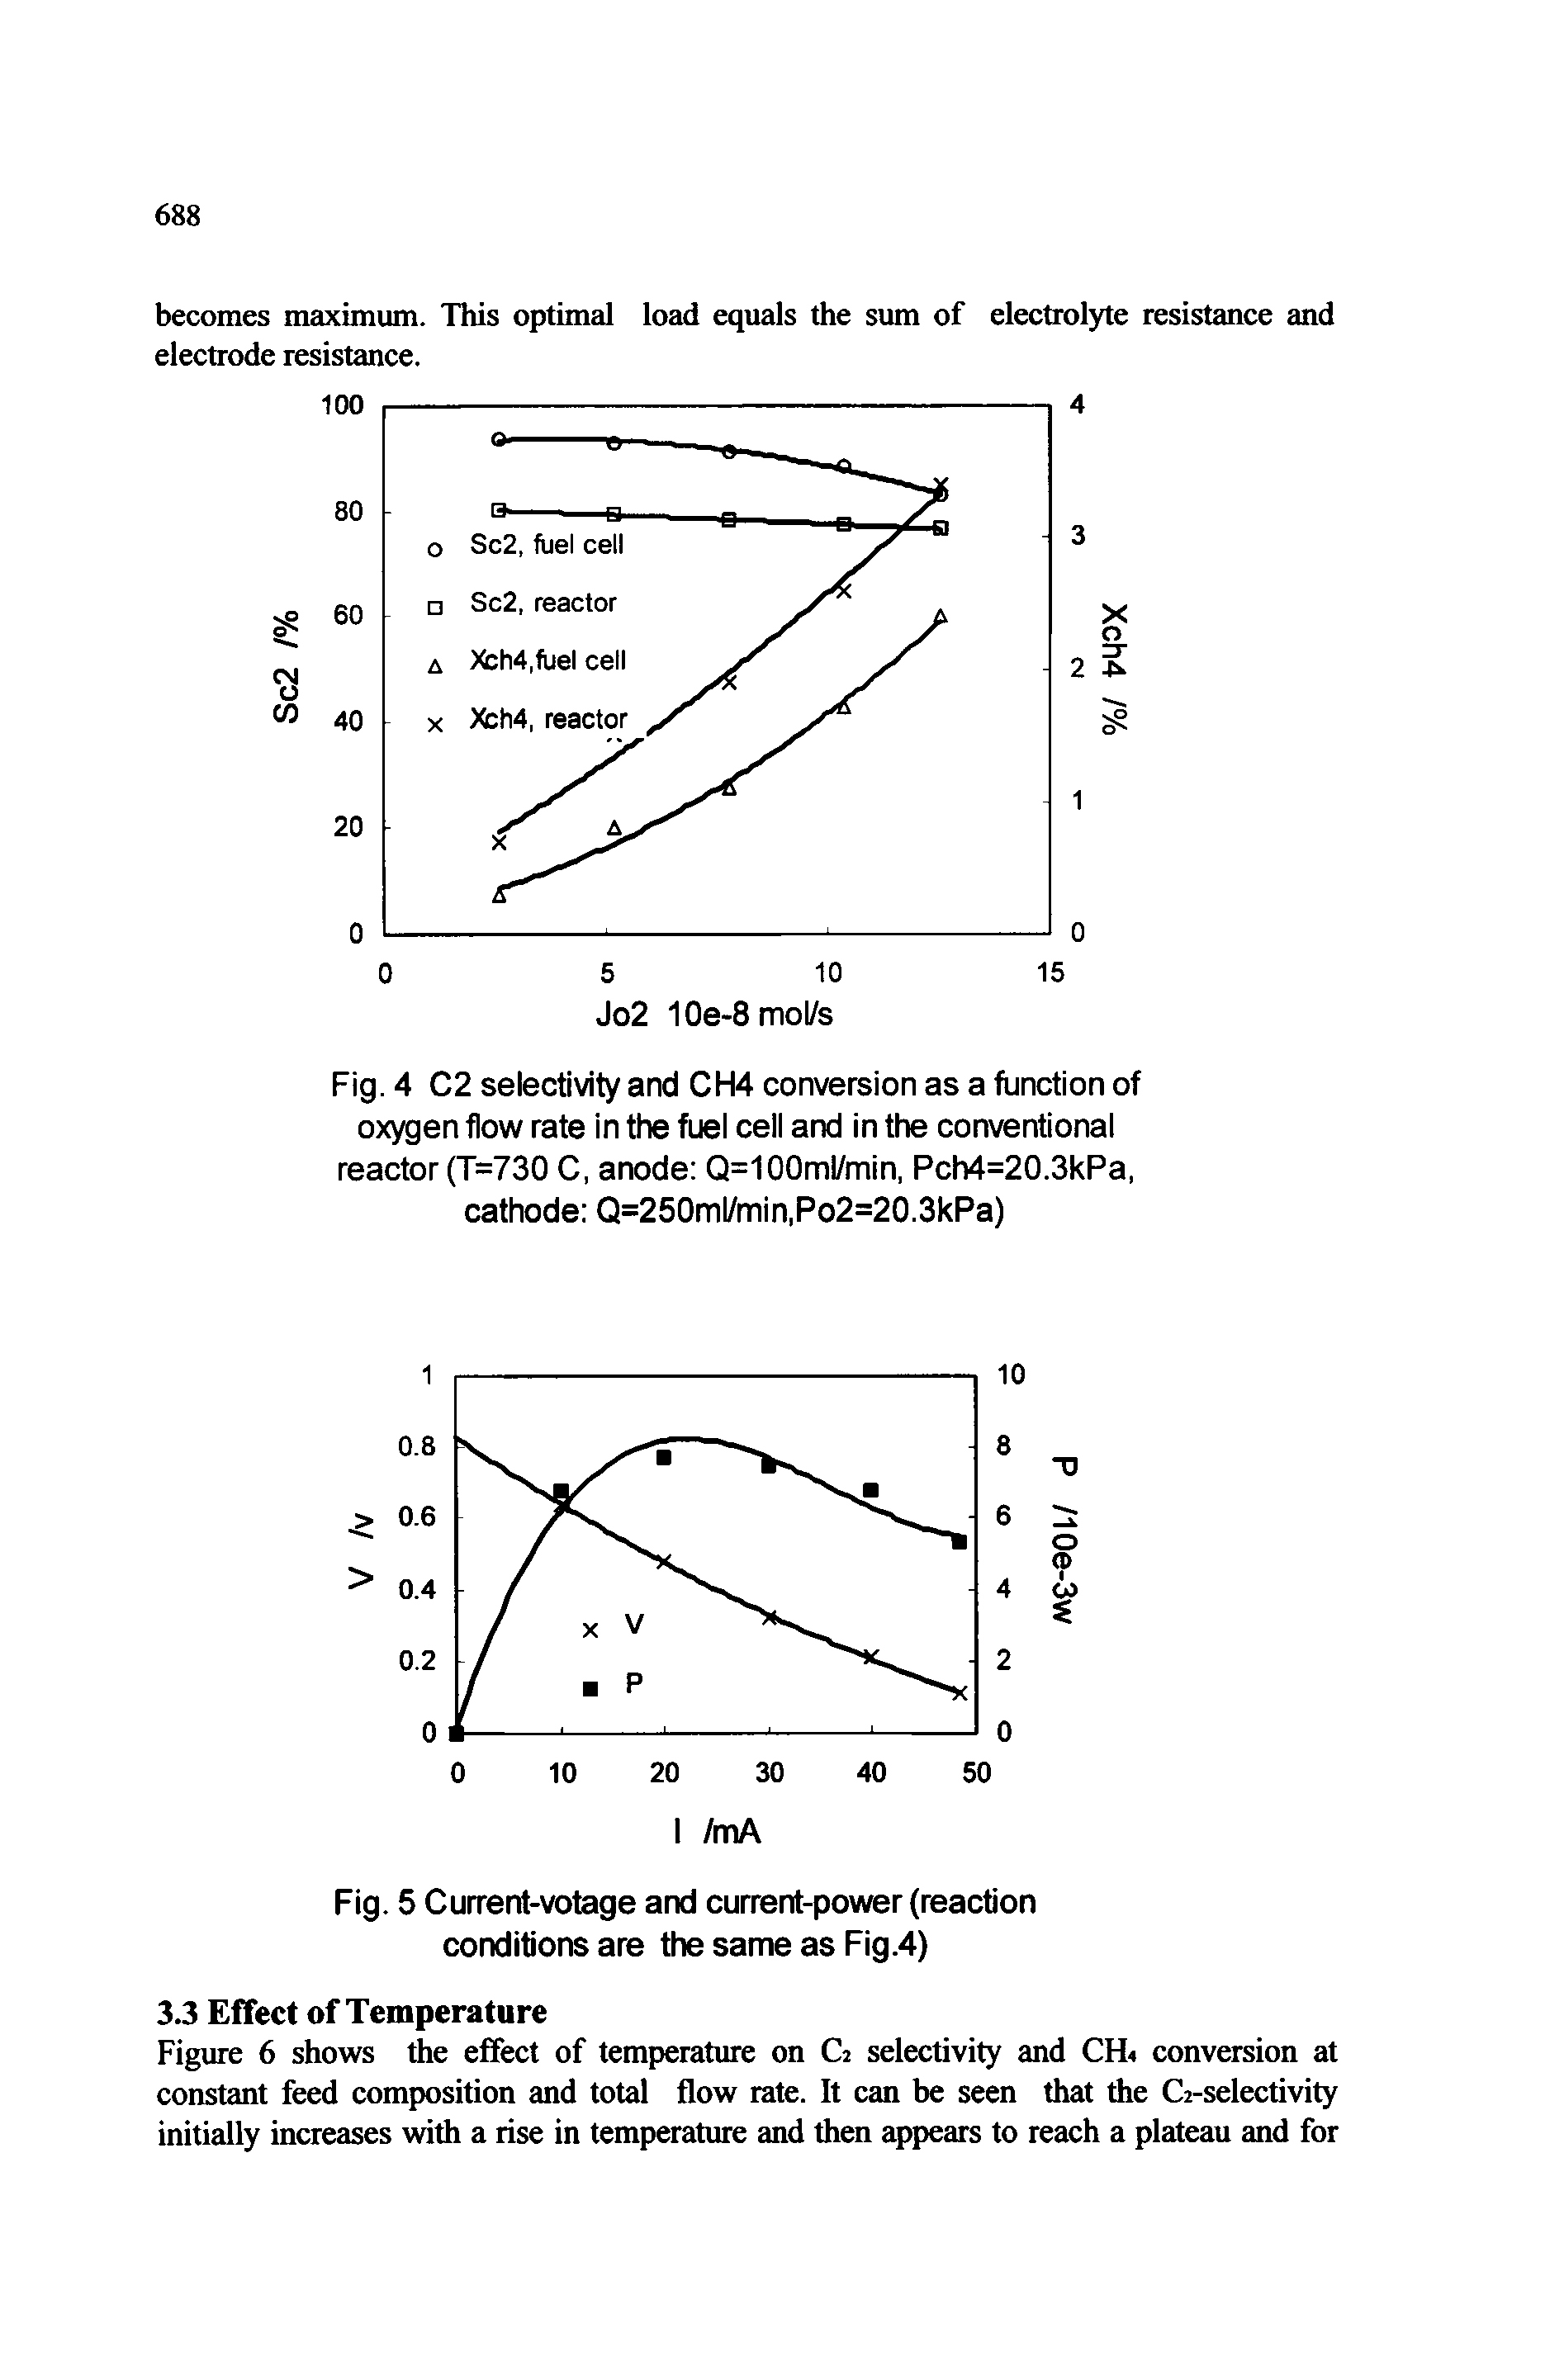 Fig. 4 C2 selectivity and CH4 conversion as a function of oxygen flow rate in the fuel cell and in the conventional reactor (T=730 C, anode Q=100ml/min, Pch4=20.3kPa, cathode Q=250ml/min,Po2=20.3kPa)...